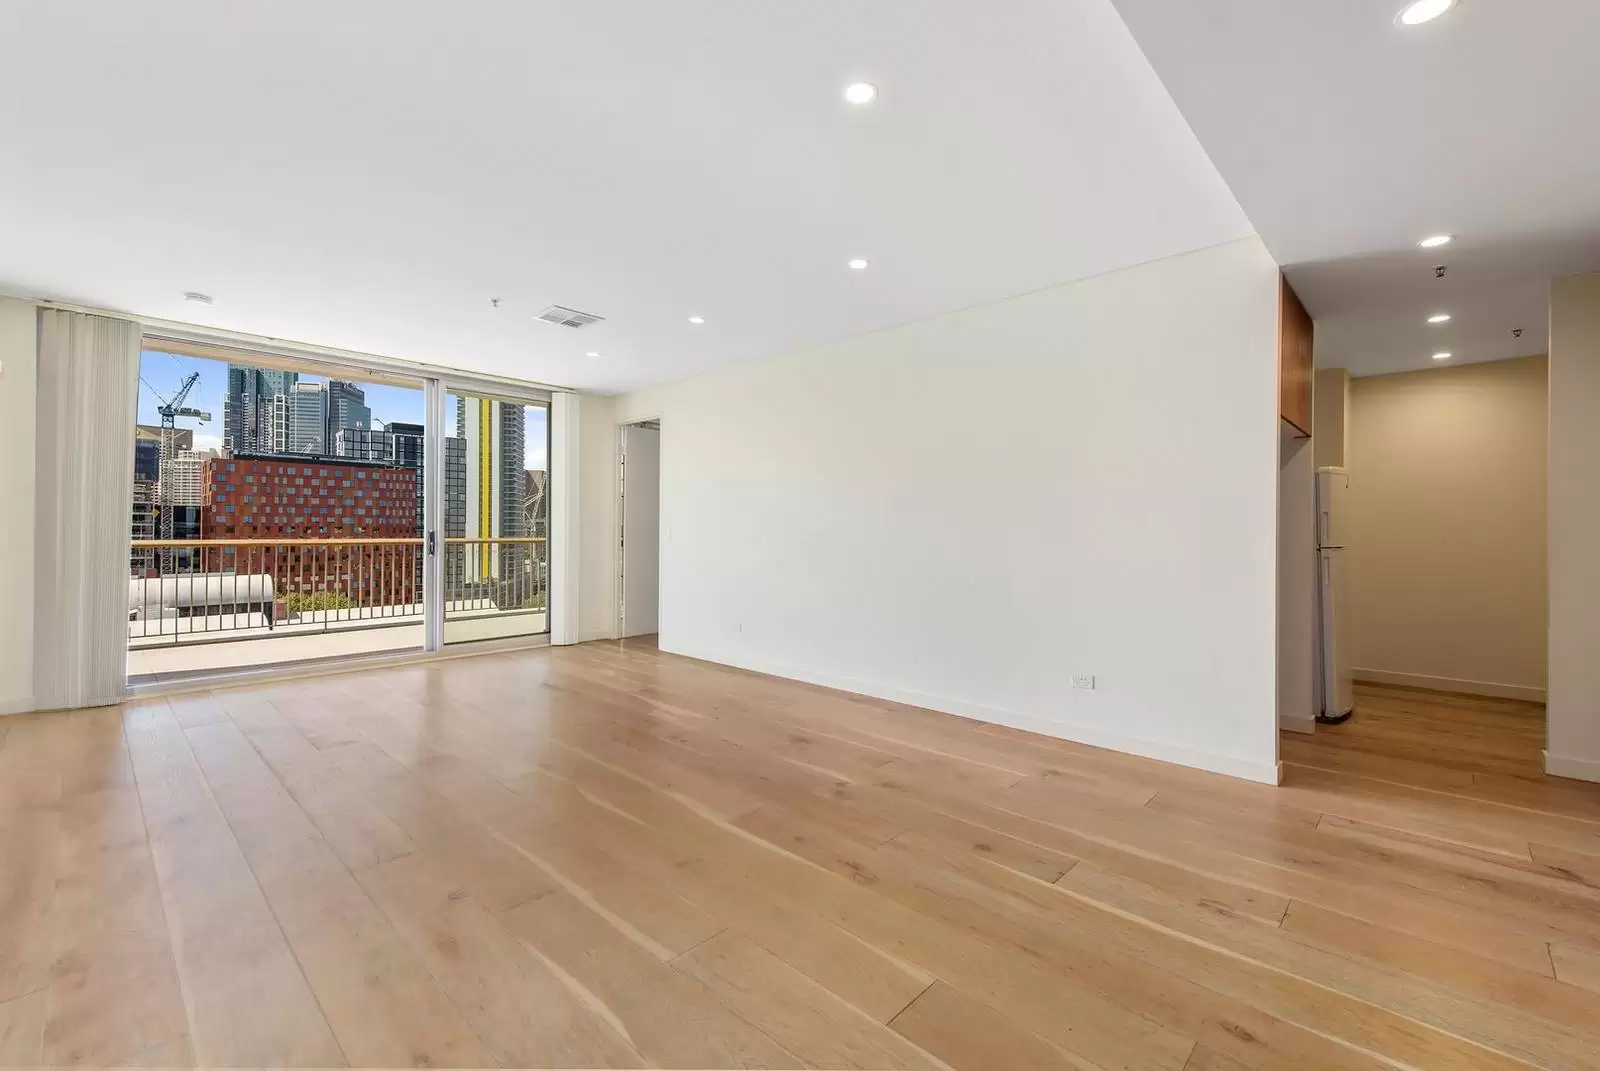 Photo #3: 902/349 Bulwara Road, Ultimo - Leased by Sydney Sotheby's International Realty